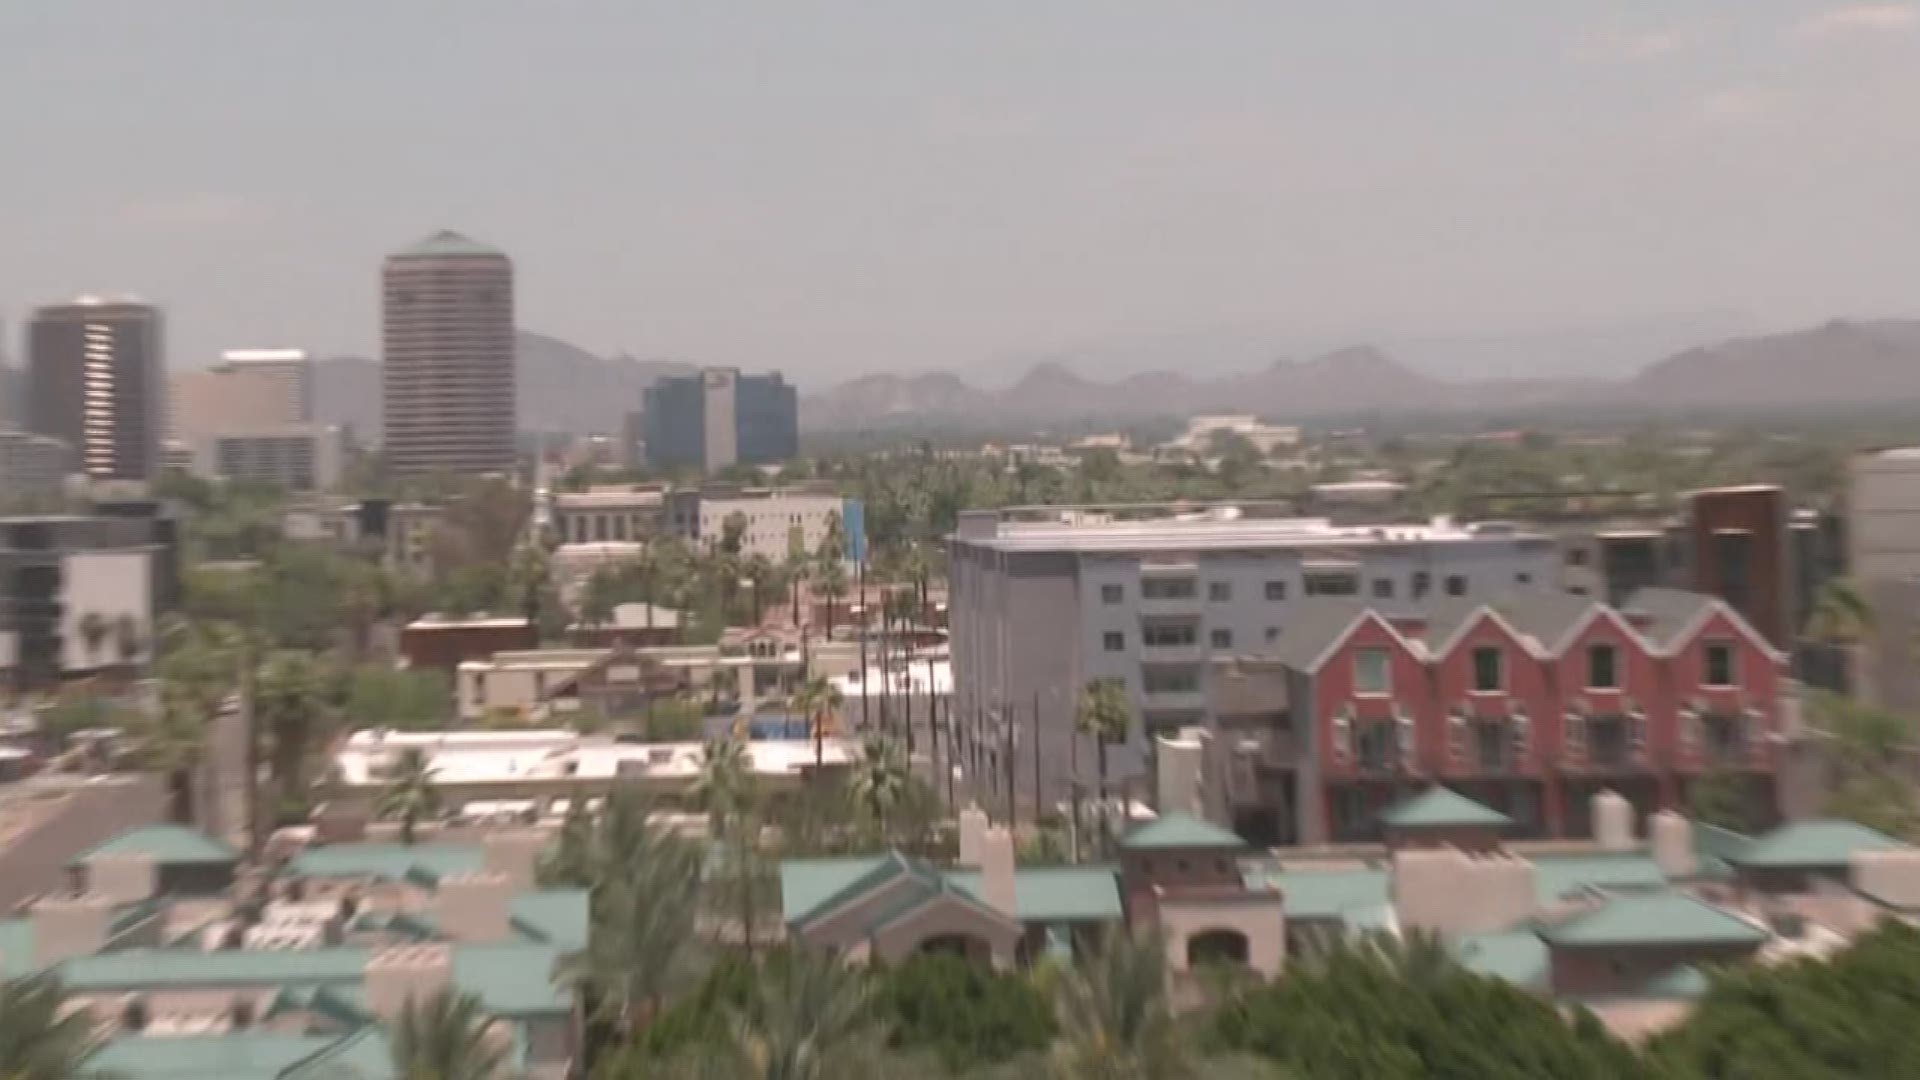 12 News looks deeper into how bad the air quality really is in the Valley.